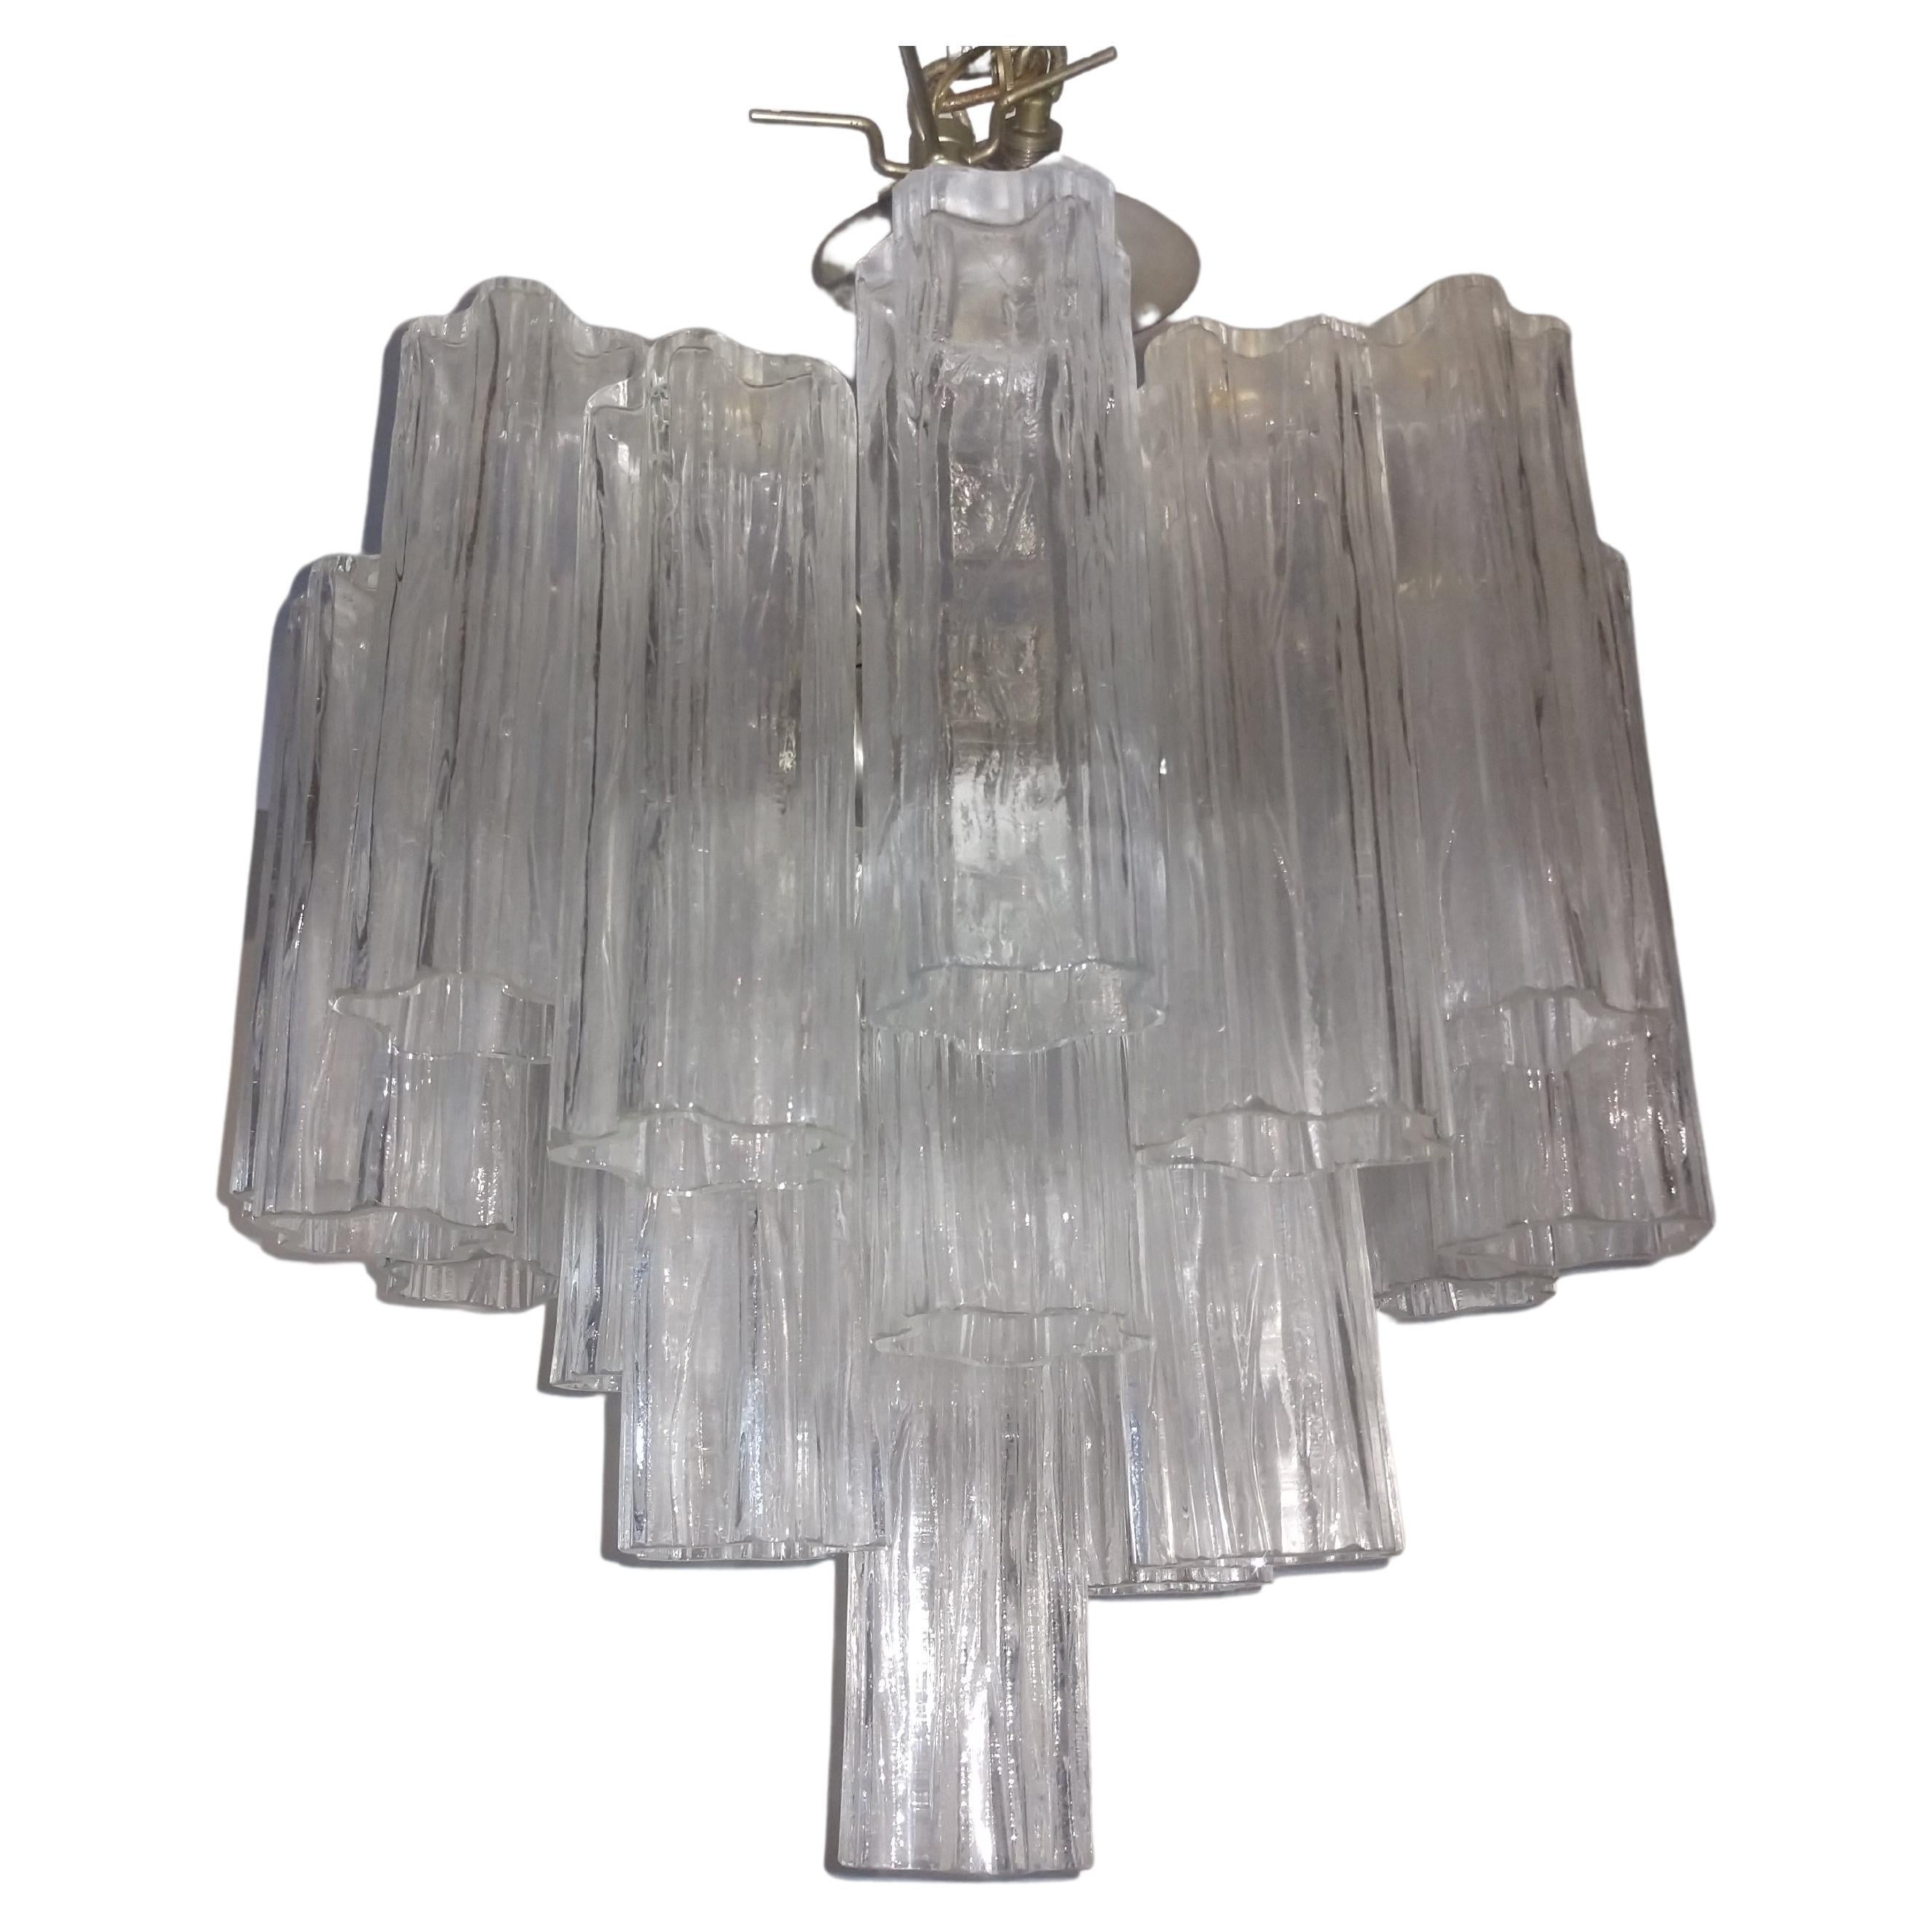 Mid-Century Modern Murano Tronchi Chandelier Camer, C1960 In Good Condition For Sale In Port Jervis, NY